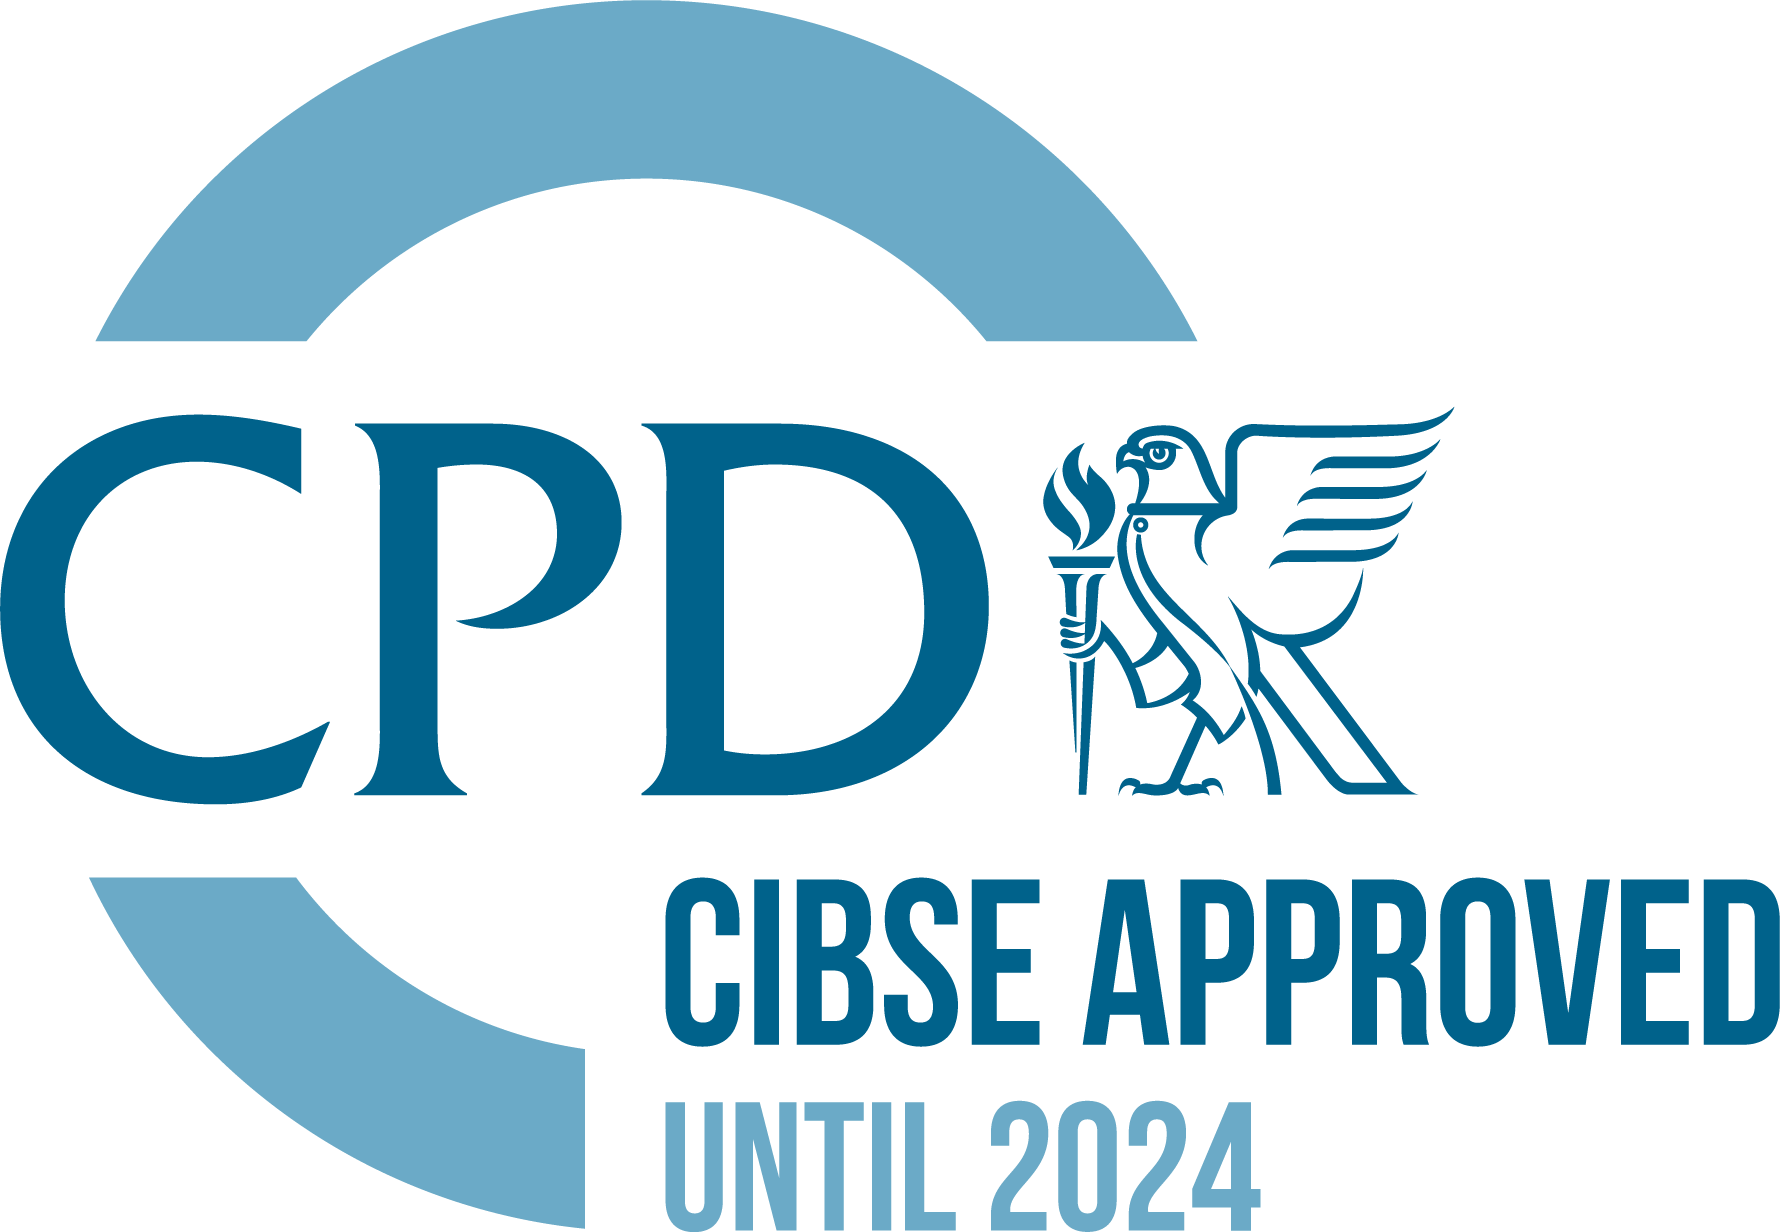 Power Control becomes CIBSE CPD Course provider